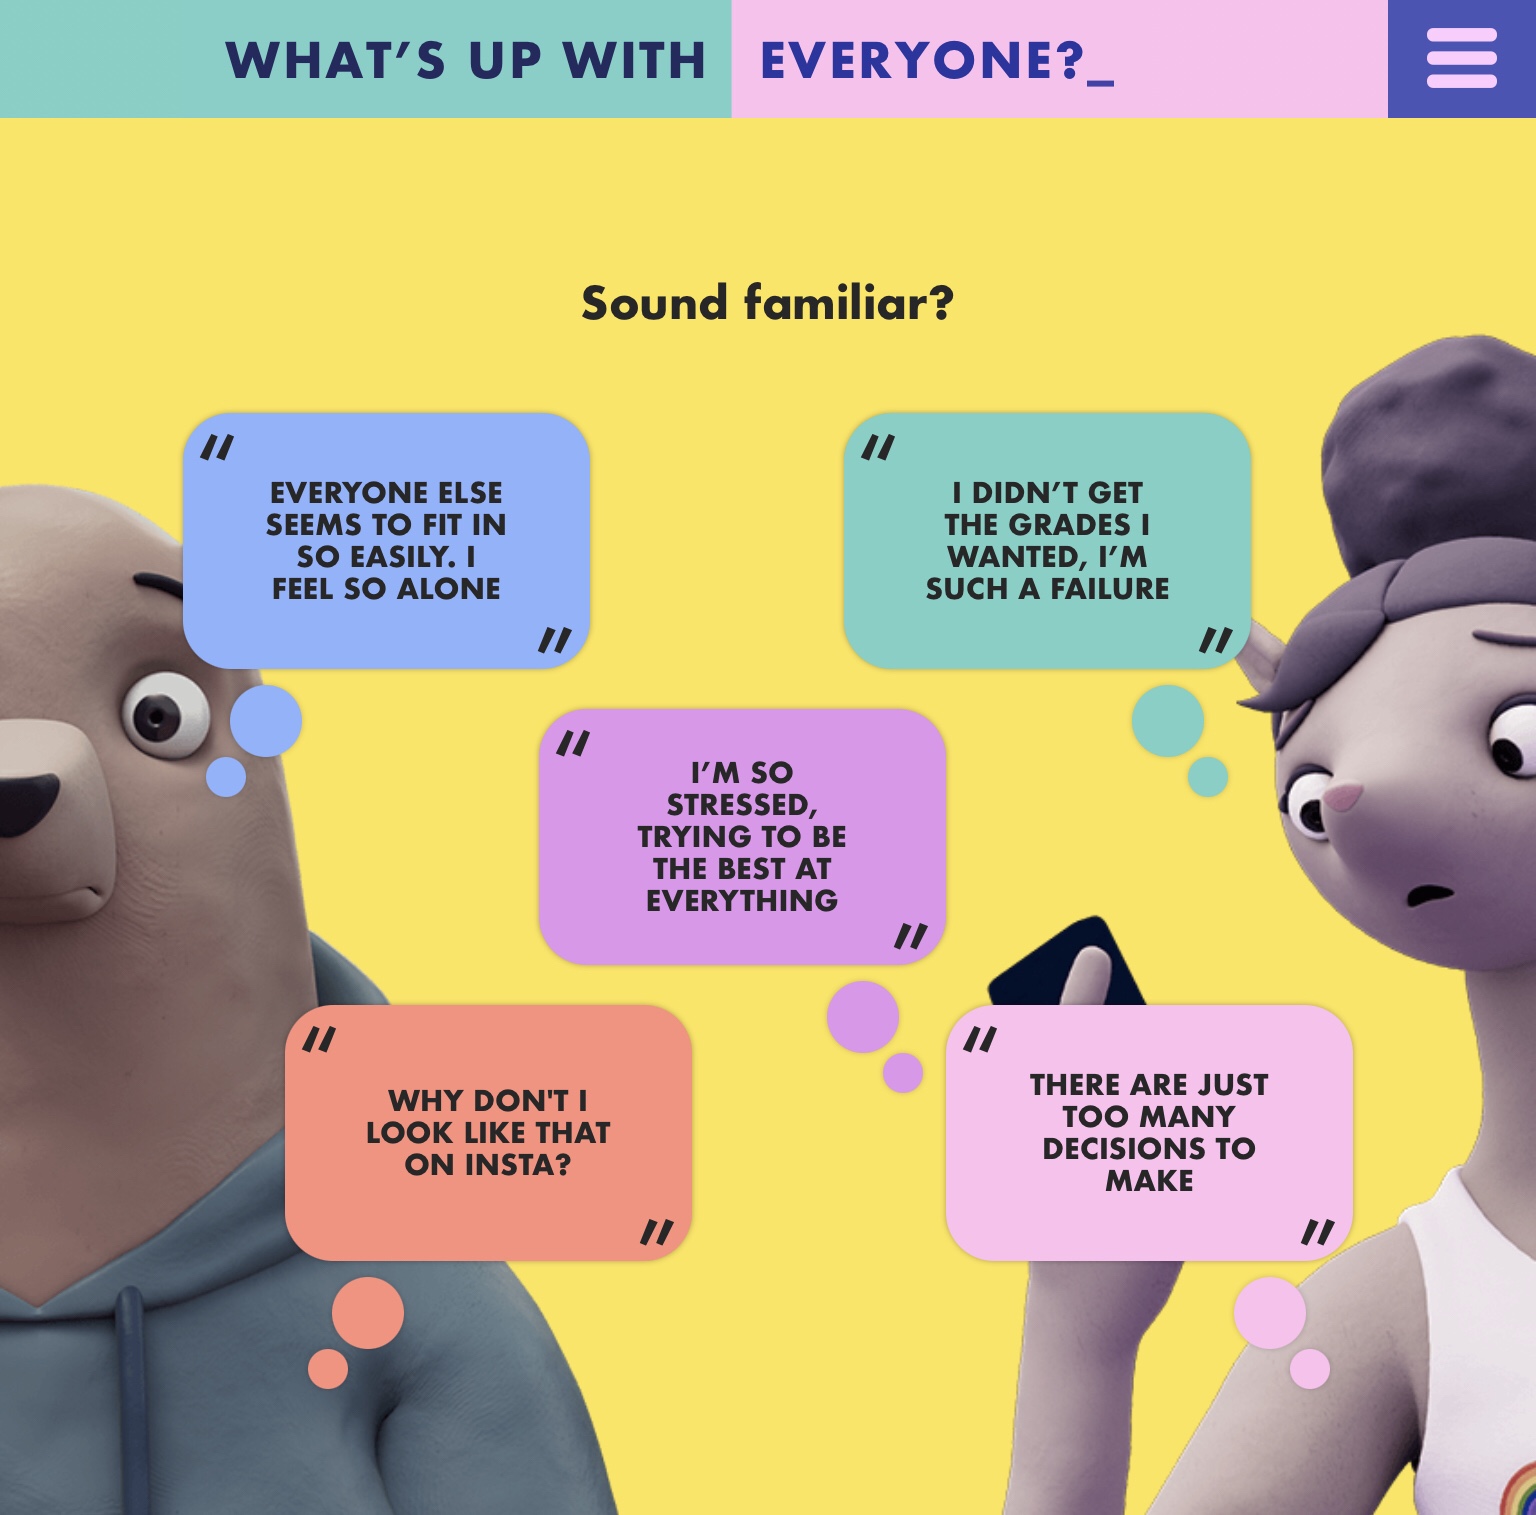 Aardman - What’s Up With Everyone? Campaign